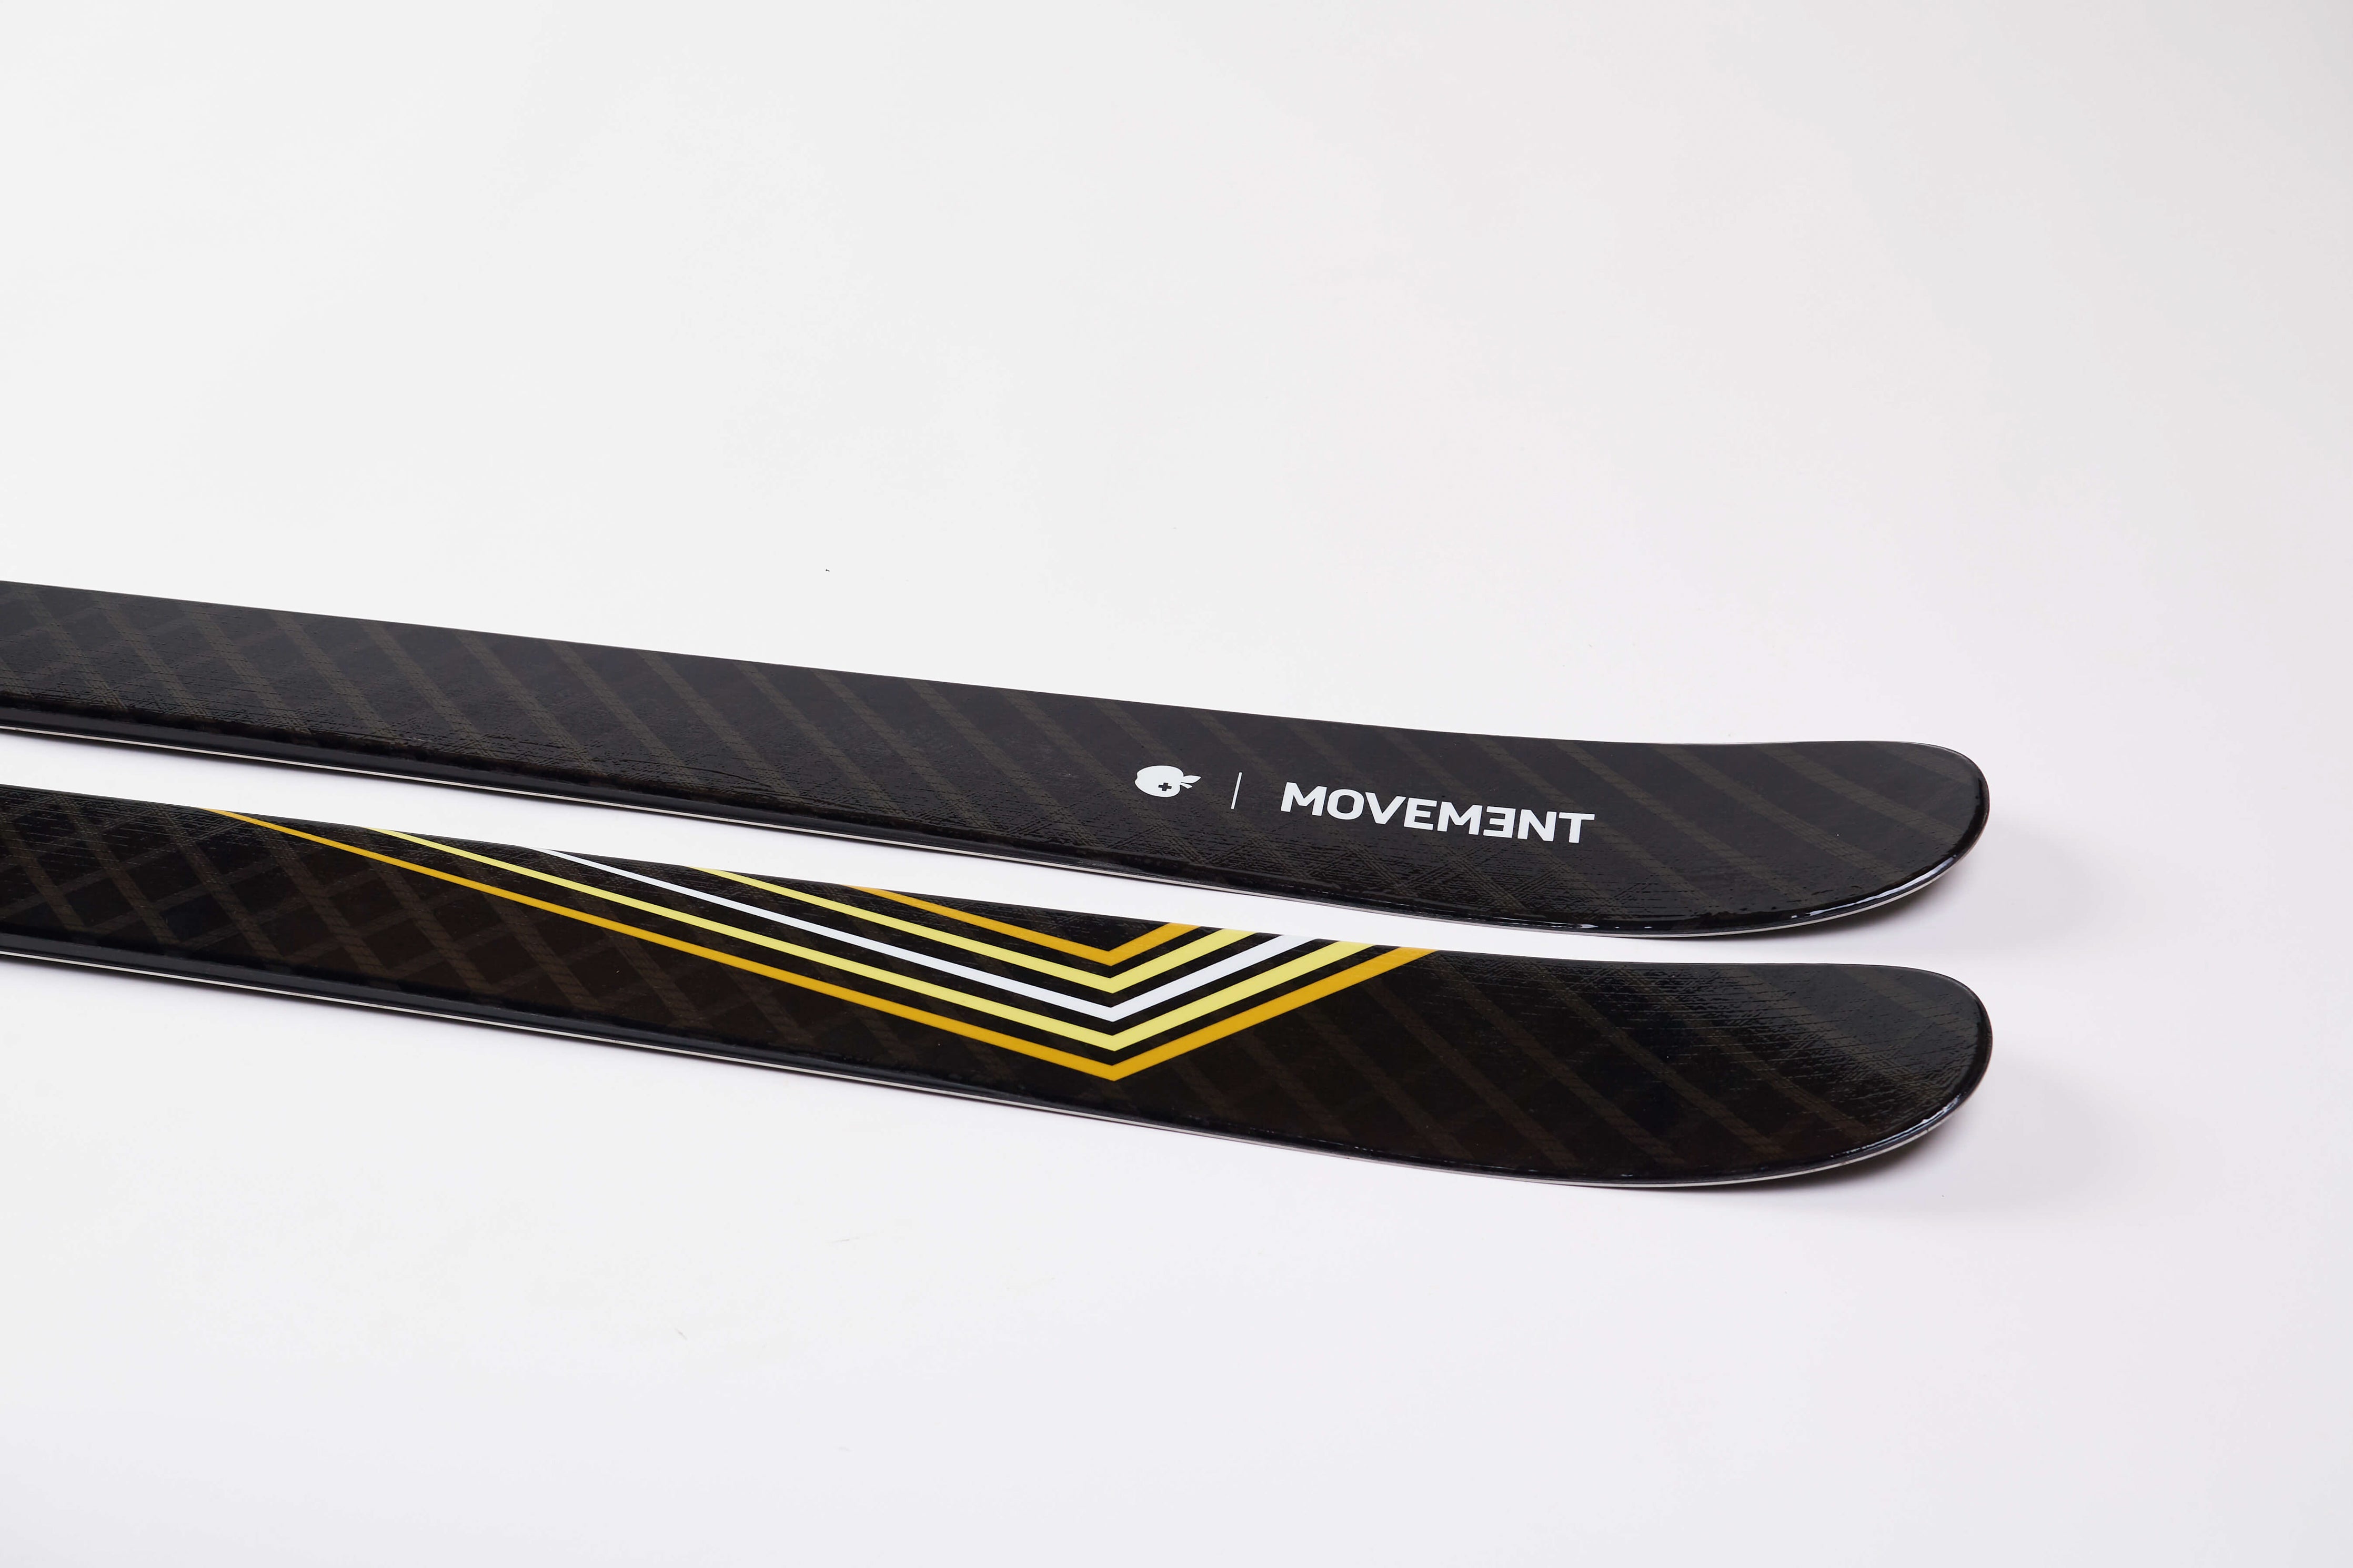 Experience the freedom of movement with Alp Tracks 90 skis by Movement.